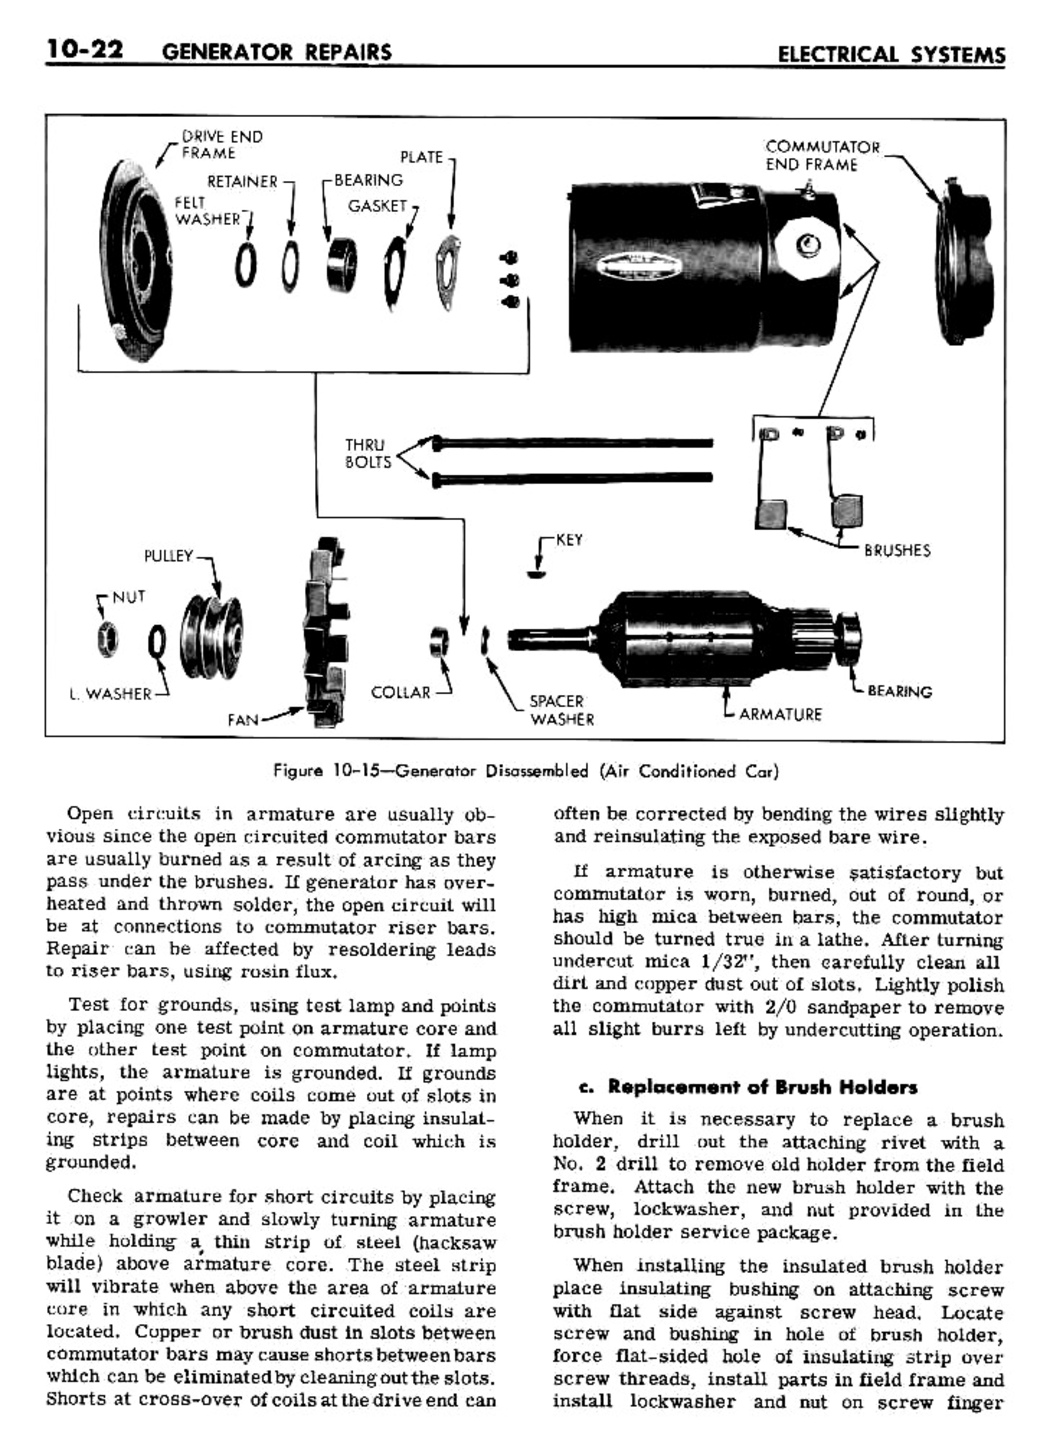 n_10 1961 Buick Shop Manual - Electrical Systems-022-022.jpg